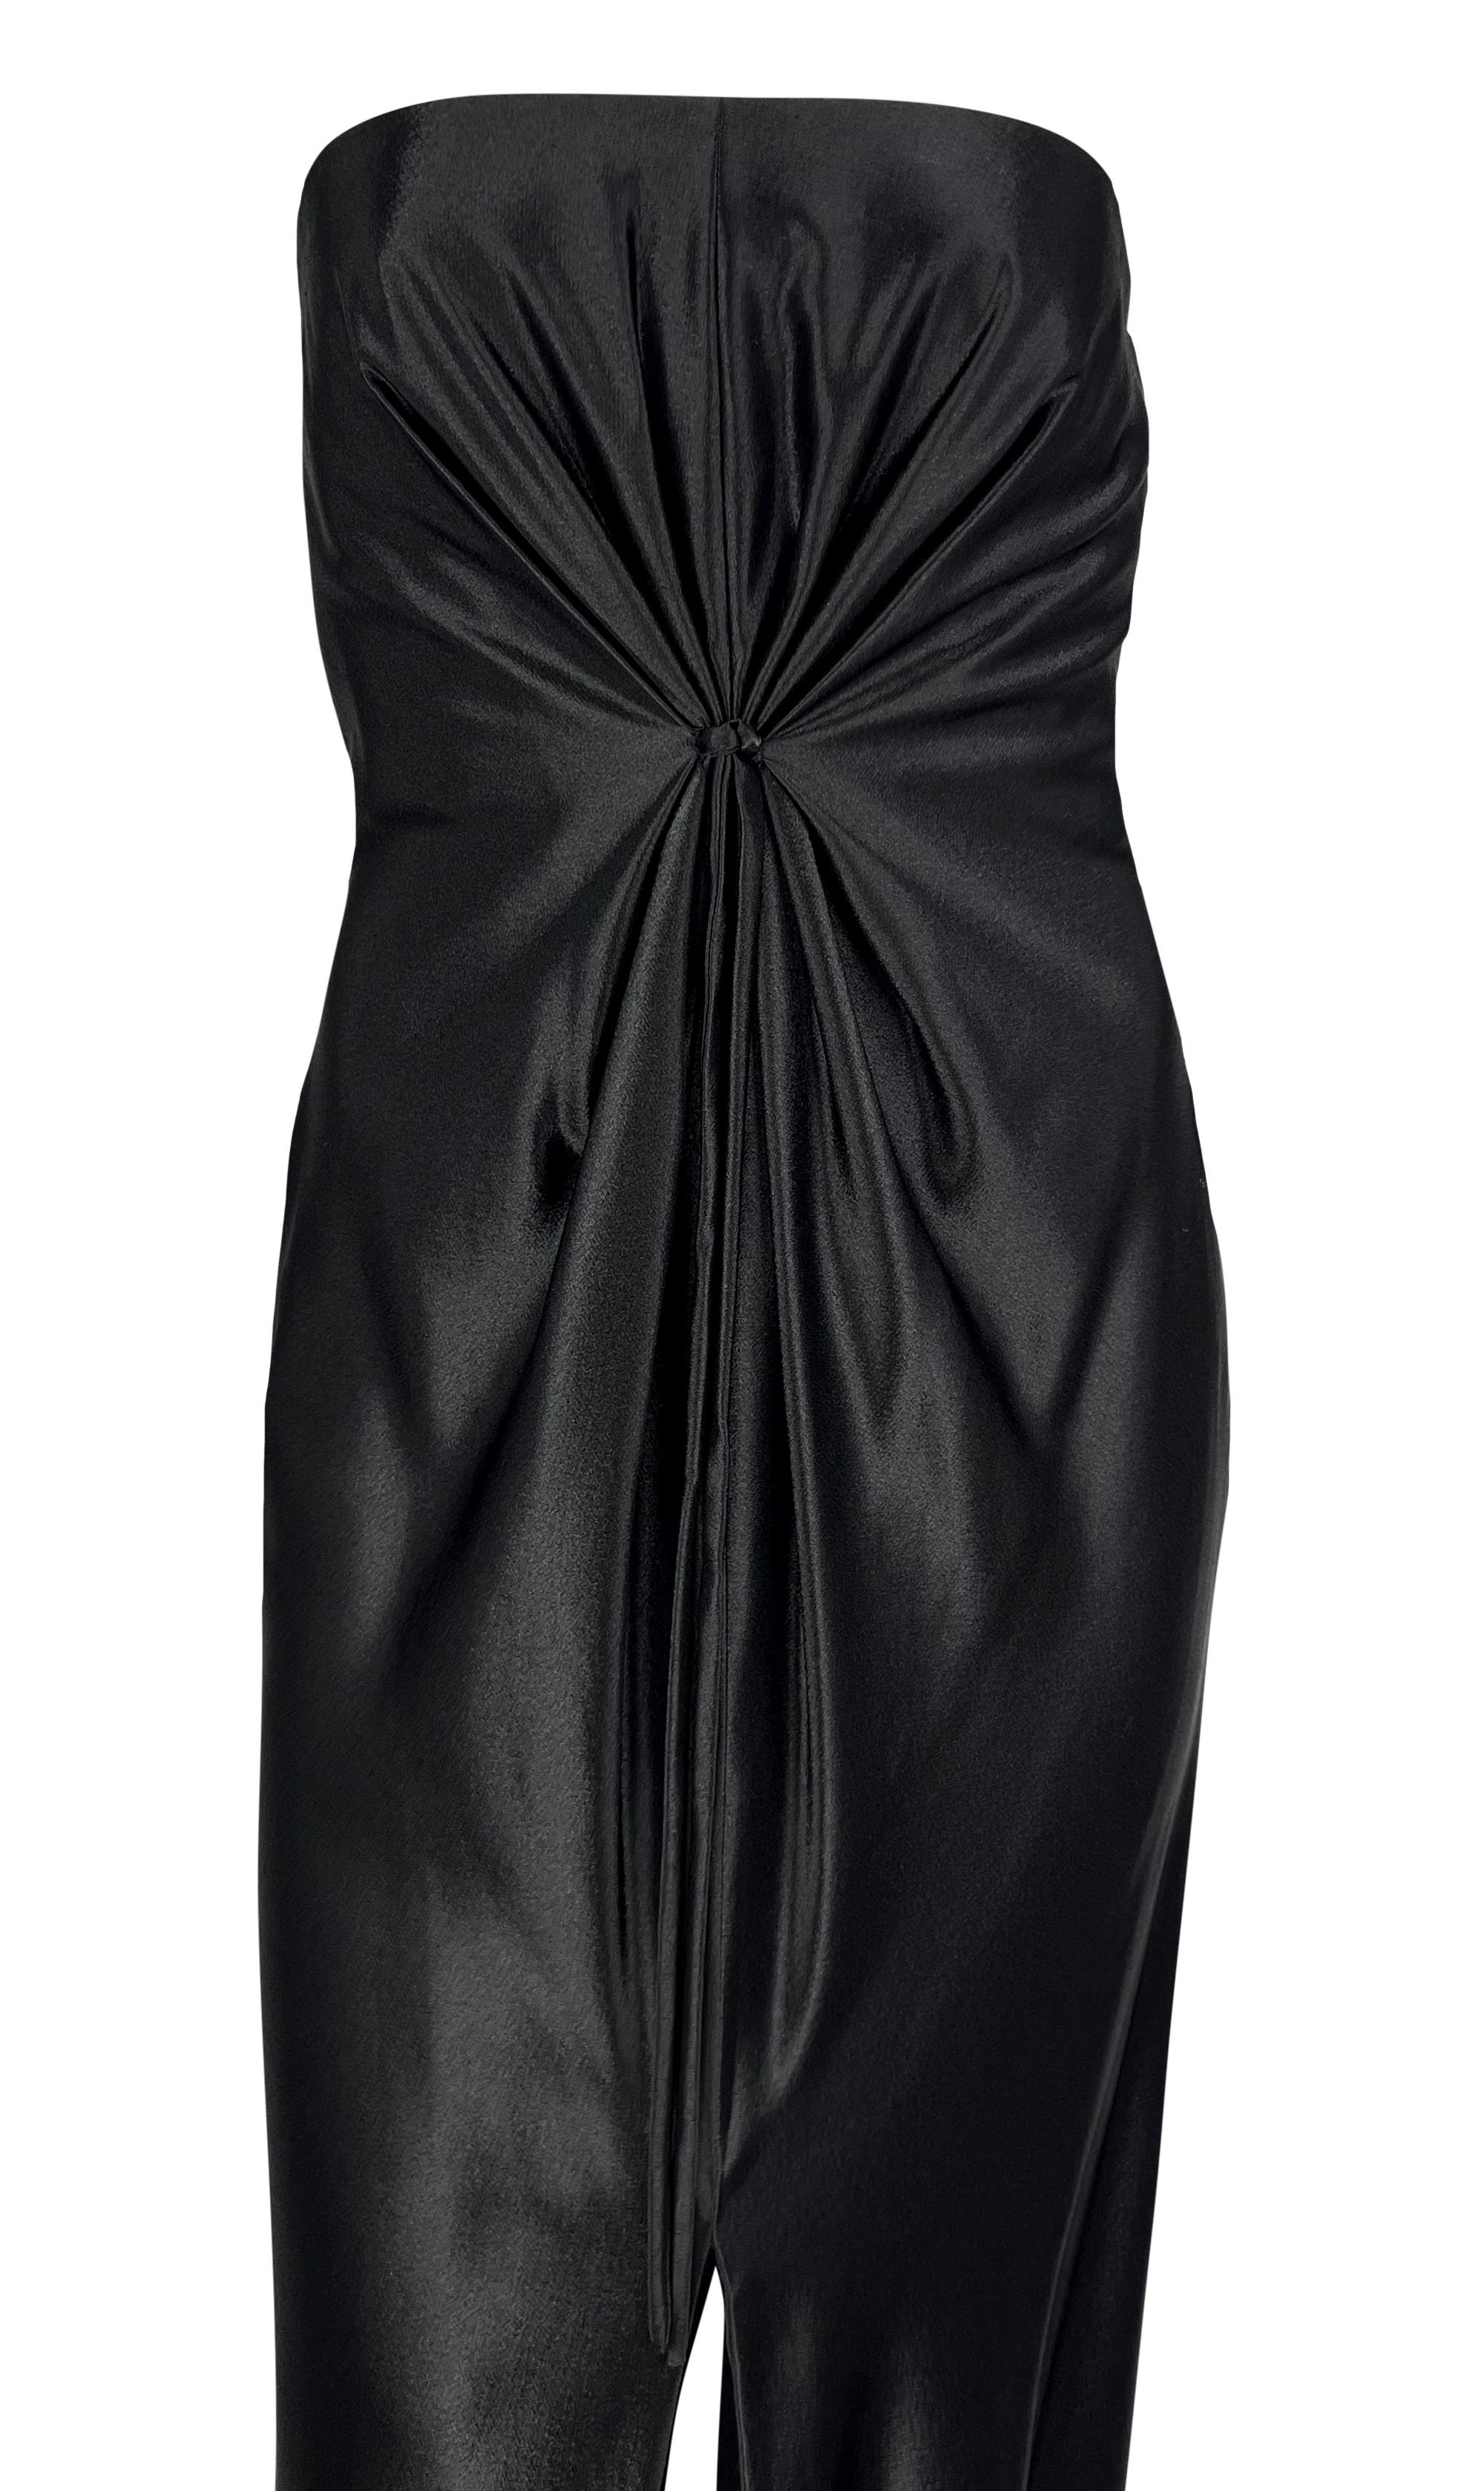 F/W 1997 Gianni Versace Strapless Satin Tie-Front Black Gown In Excellent Condition For Sale In West Hollywood, CA